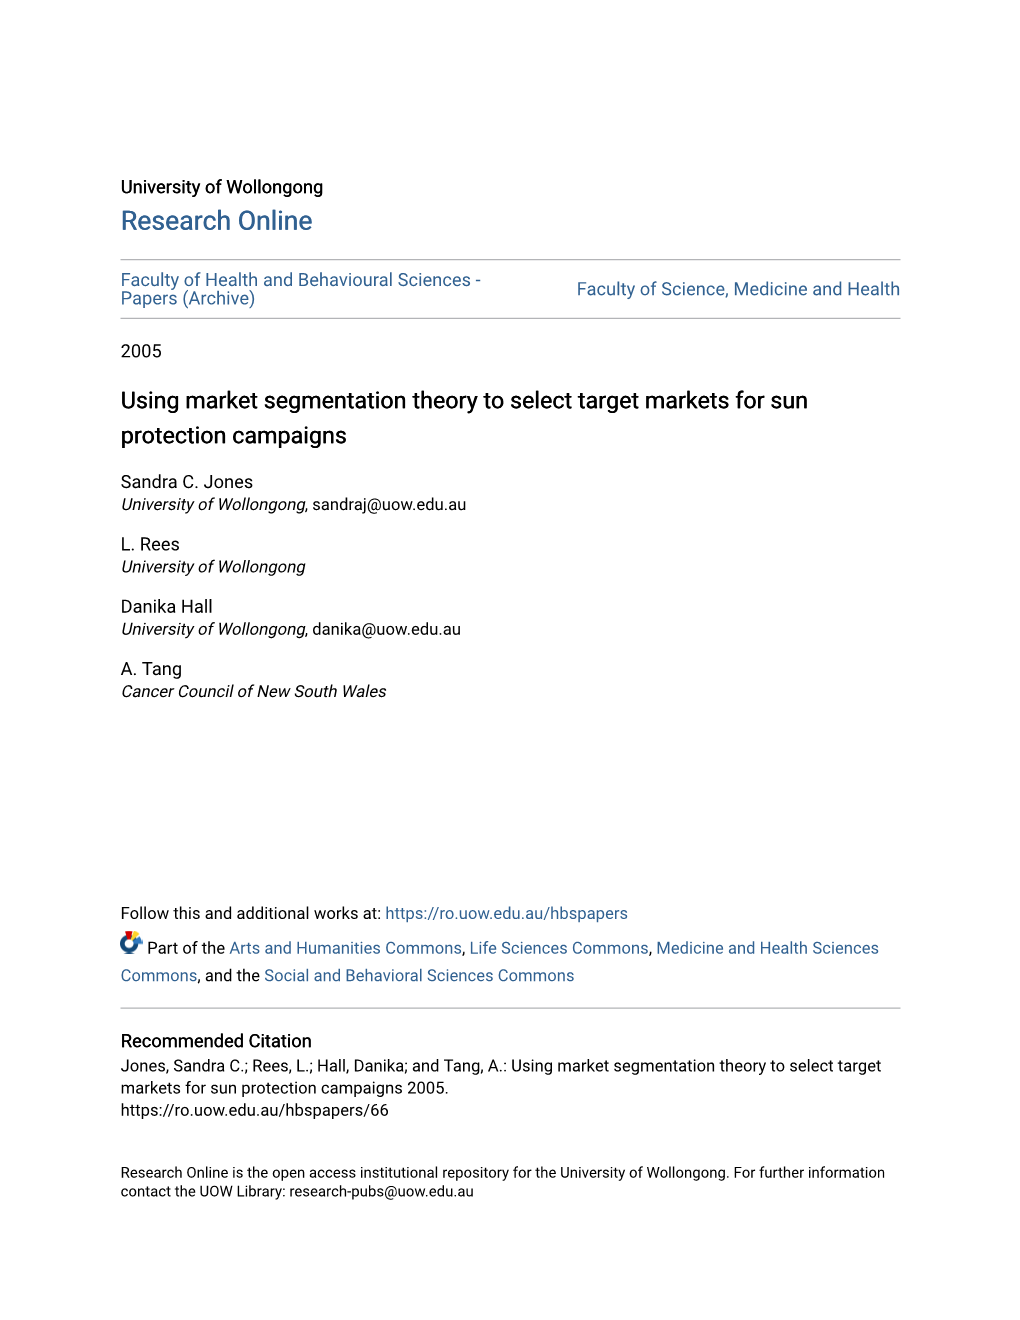 Using Market Segmentation Theory to Select Target Markets for Sun Protection Campaigns